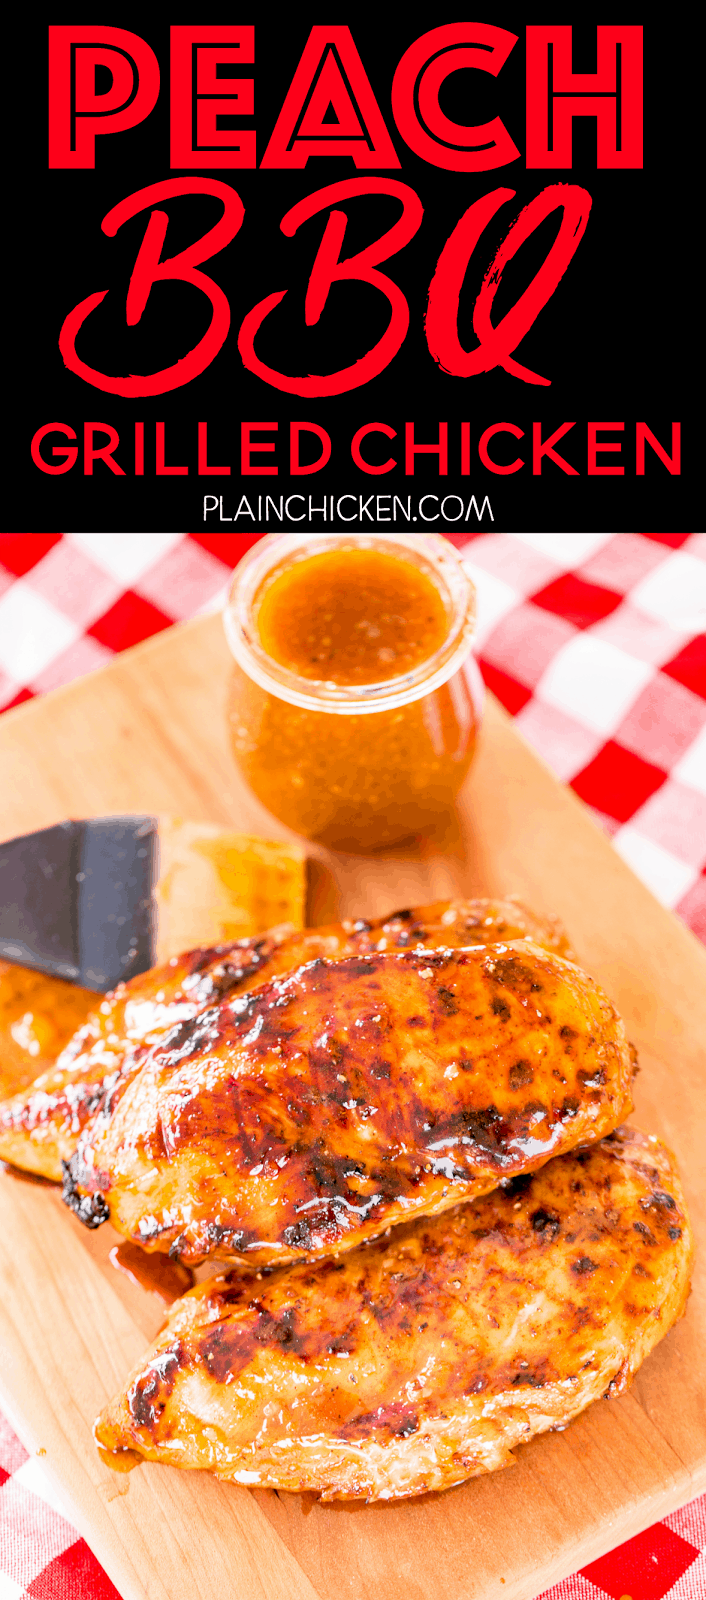 Peach BBQ Grilled Chicken - AMAZING!!! SO easy and SOOOO delicious!!! Season chicken with some store-bought BBQ seasoning and grill. Brush with an easy homemade peach BBQ sauce to finish. This is incredible!! Peach preserves, soy sauce, dry mustard, garlic, cayenne pepper, salt, and pepper. Can make the sauce ahead of time and refrigerate until ready to serve. We make this at least once a month. Everyone LOVES this easy chicken recipe.